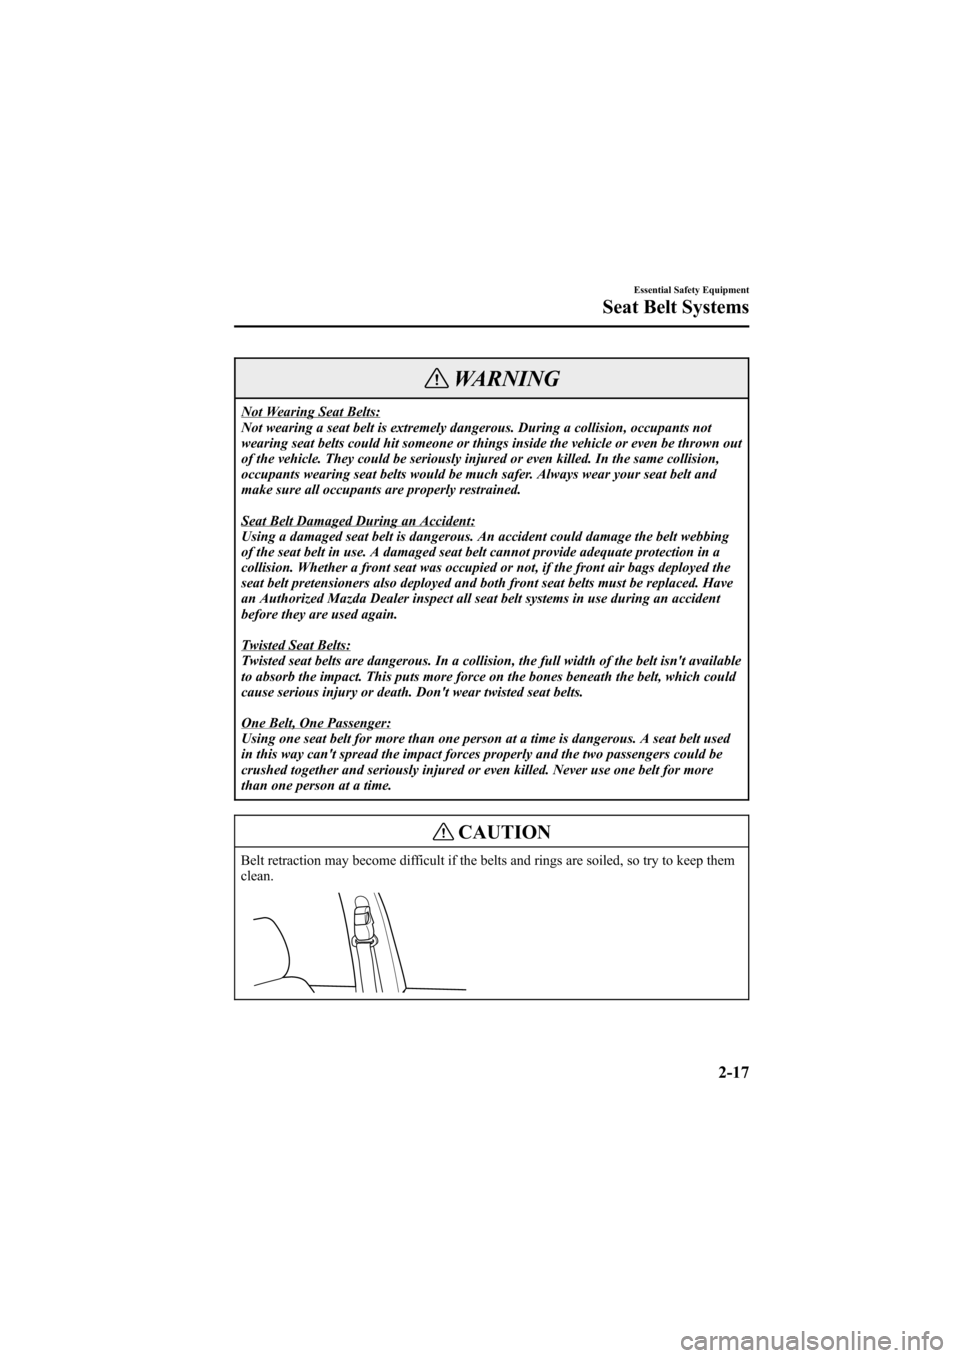 MAZDA MODEL 6 2005  Owners Manual (in English) Black plate (31,1)
WARNING
Not Wearing Seat Belts:
Not wearing a seat belt is extremely dangerous. During a collision, occupants not
wearing seat belts could hit someone or things inside the vehicle o